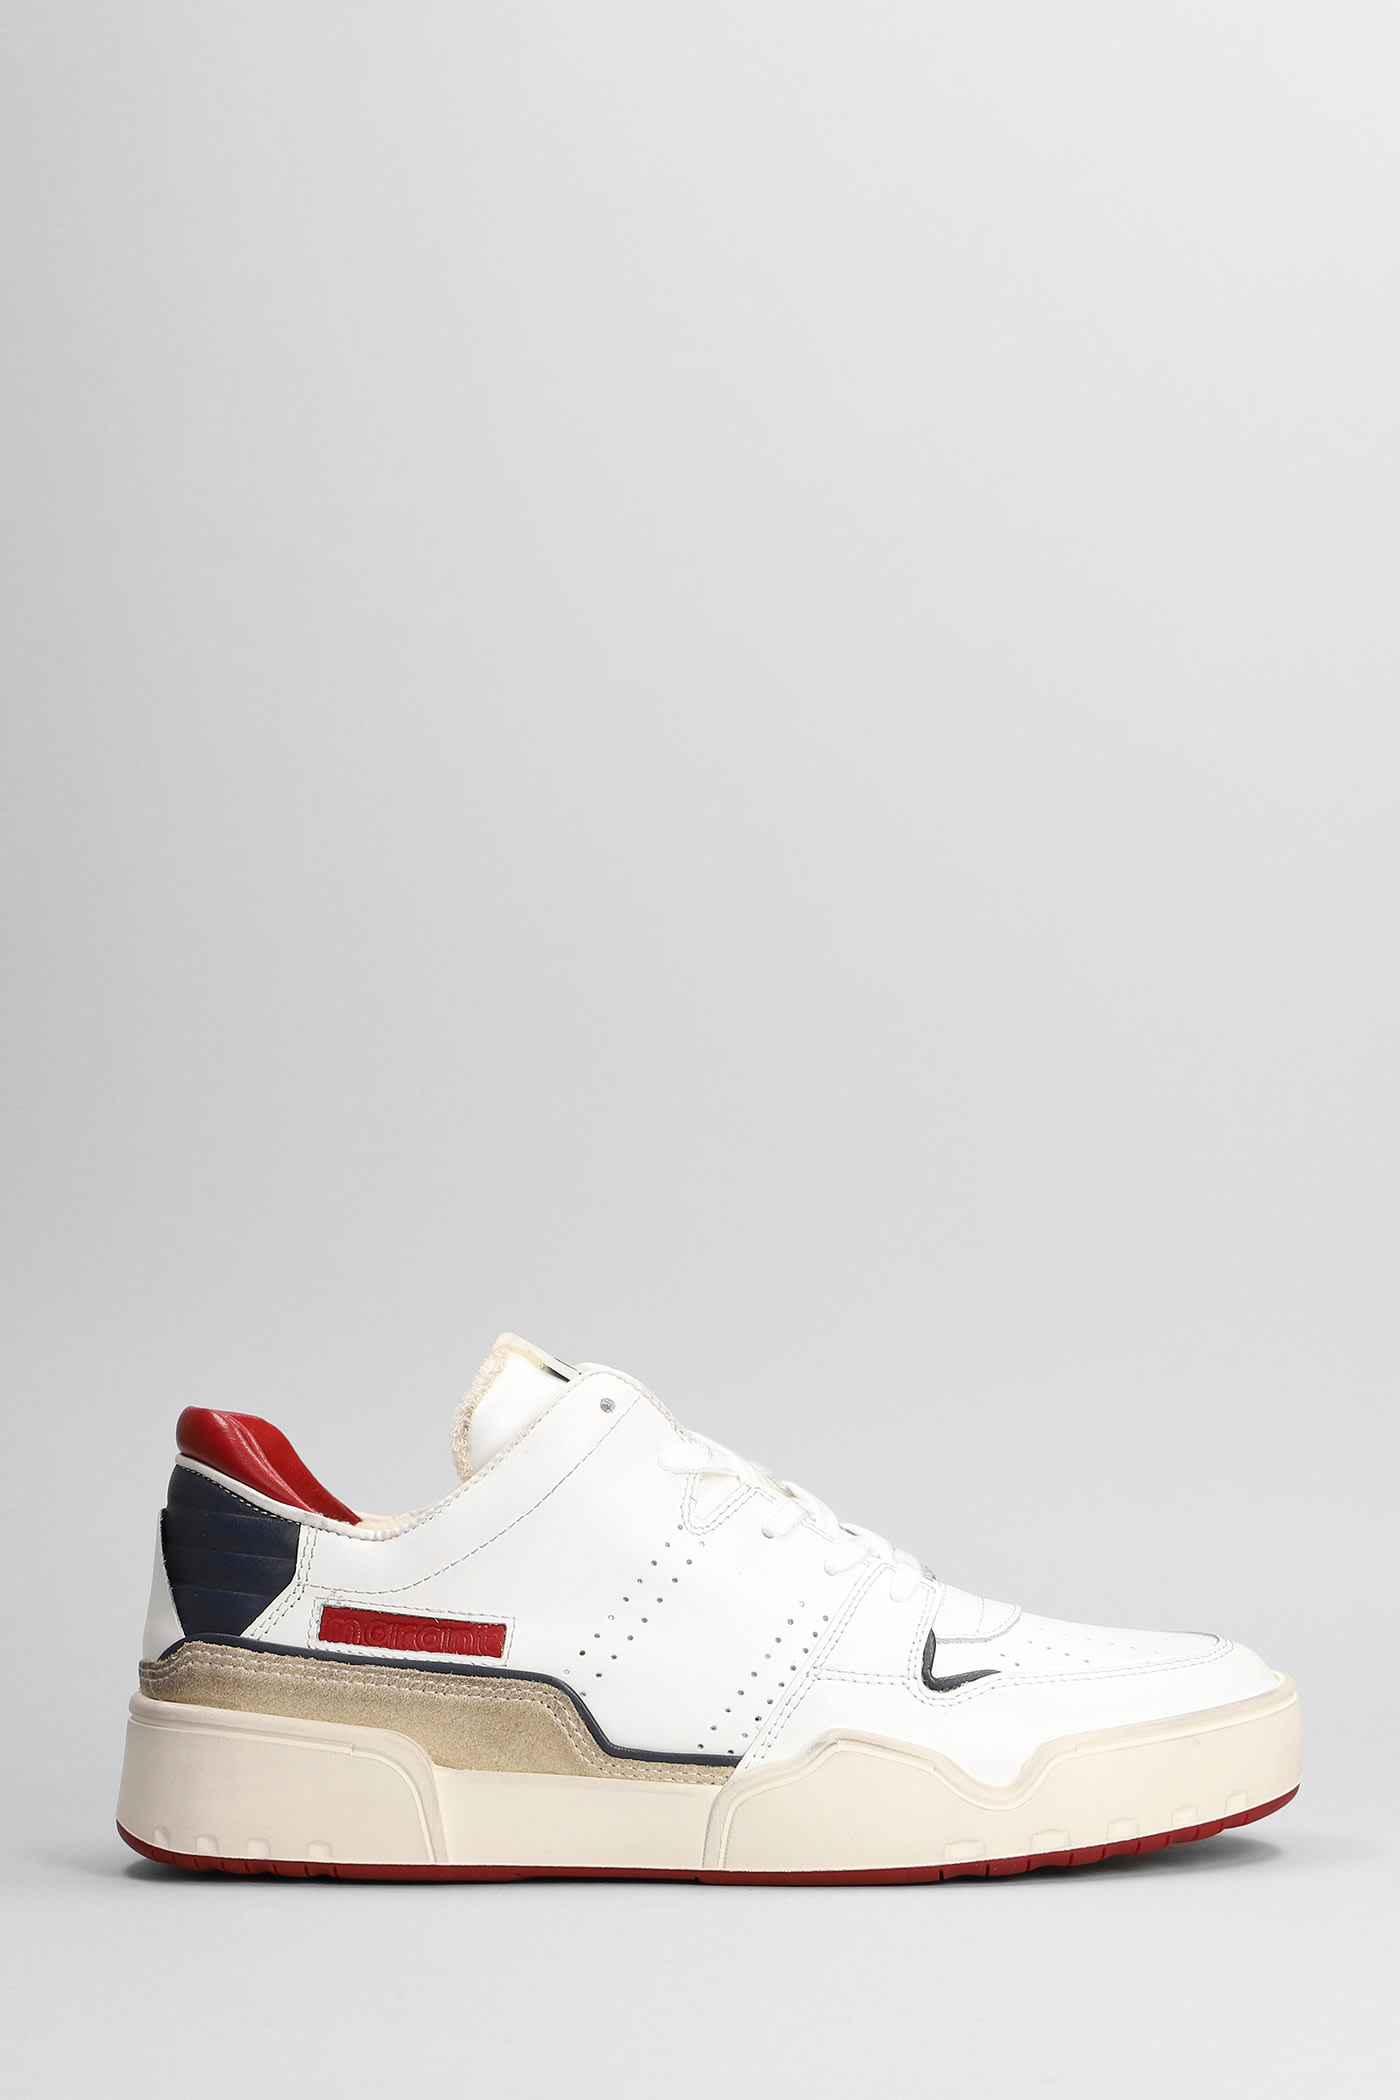 Isabel Marant Emreeh Sneakers In White Leather